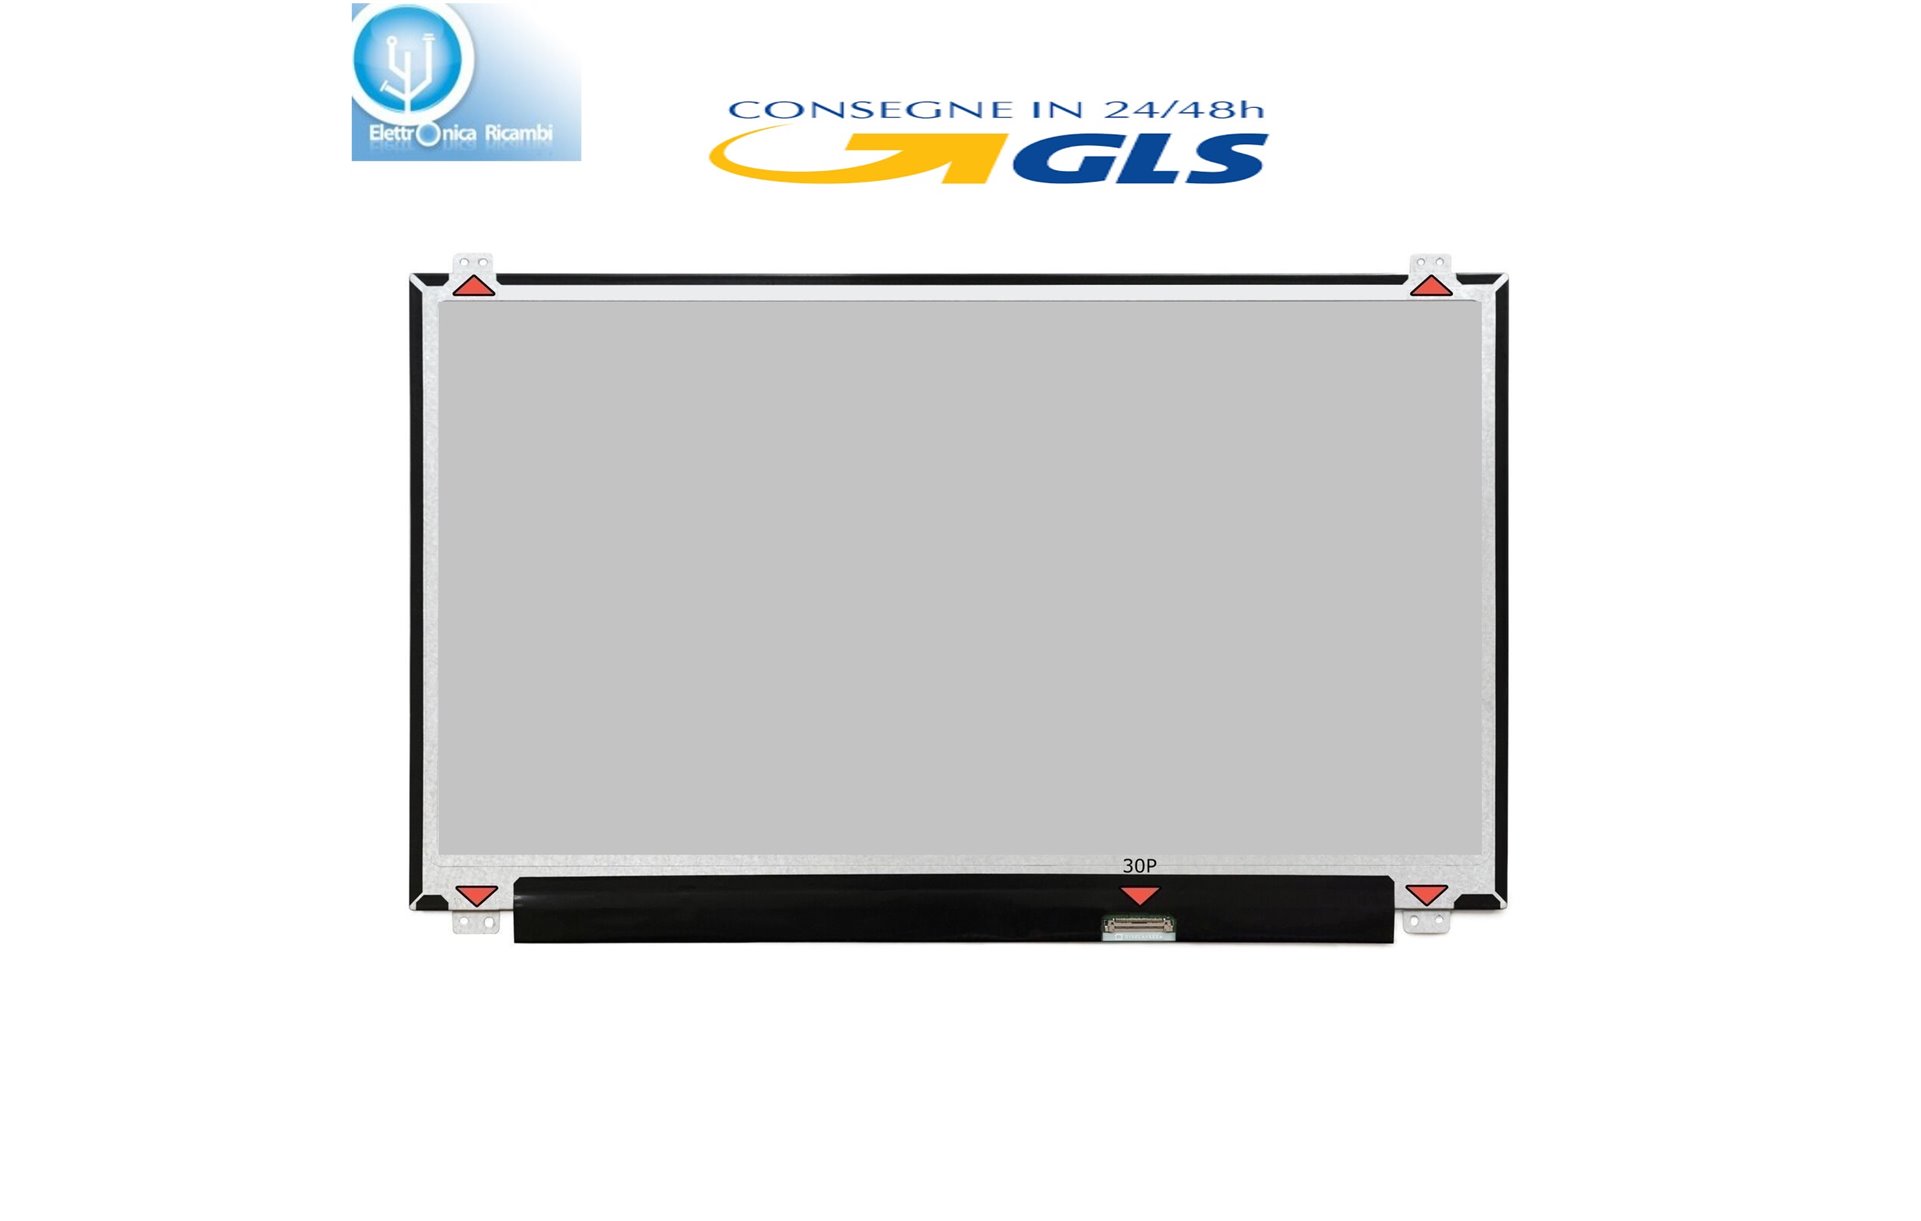 DISPLAY LCD Acer ASPIRE TIMELINE ULTRA M3 581P 15.6 WideScreen (13.6"x7.6") LED